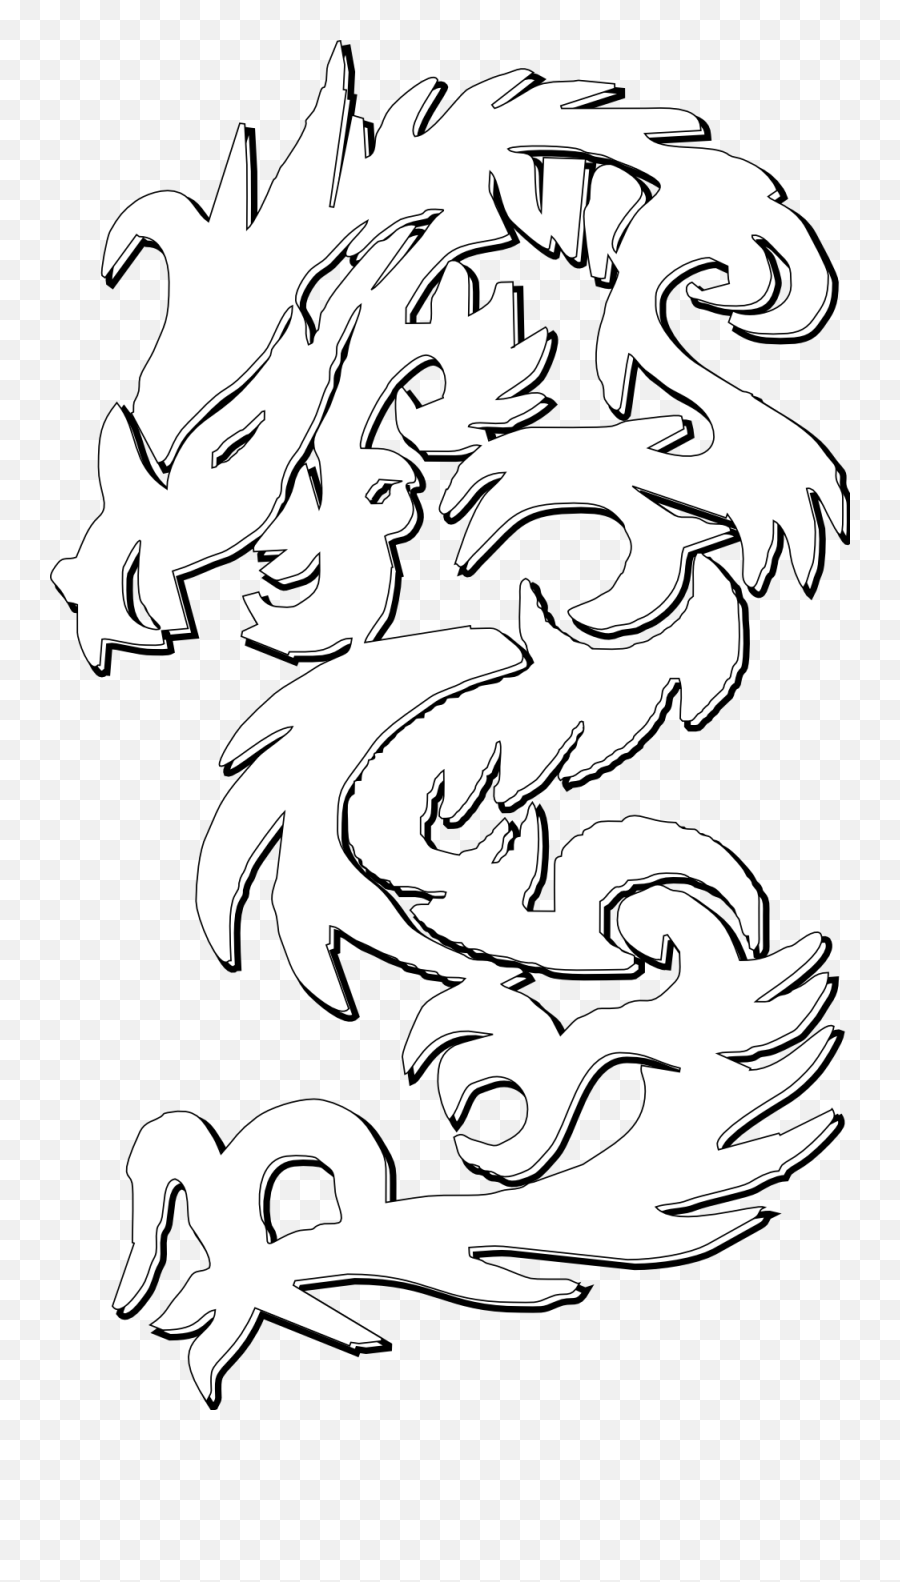 Free Picture Of Dragon Download Free Clip Art Free Clip - Chinese White Dragon Png Emoji,Dragon Clipart Black And White